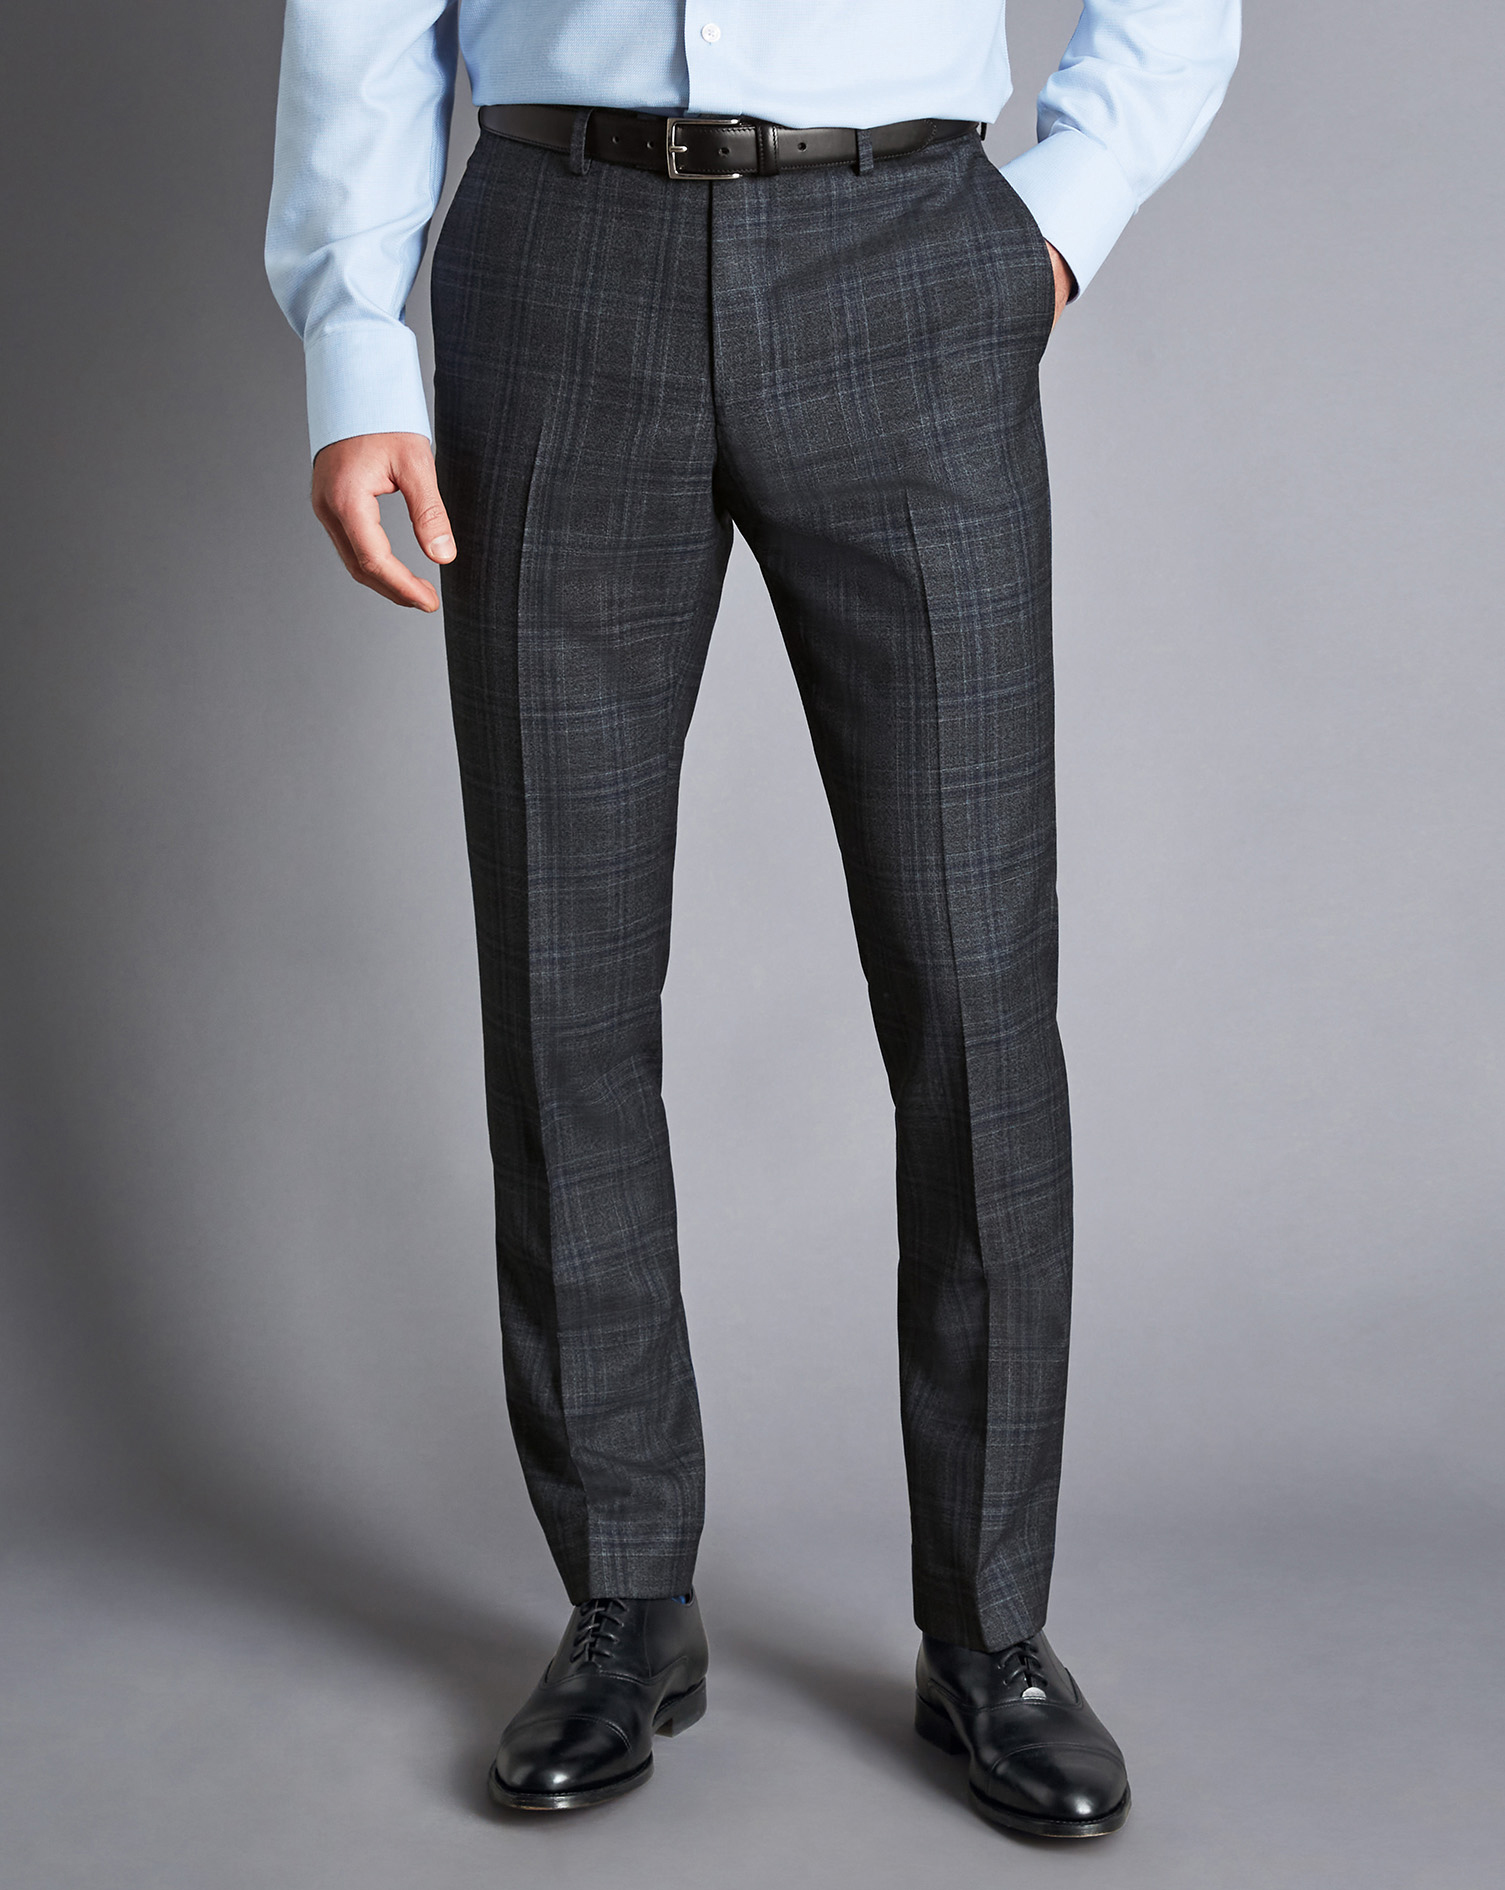 mens suit trousers checkered